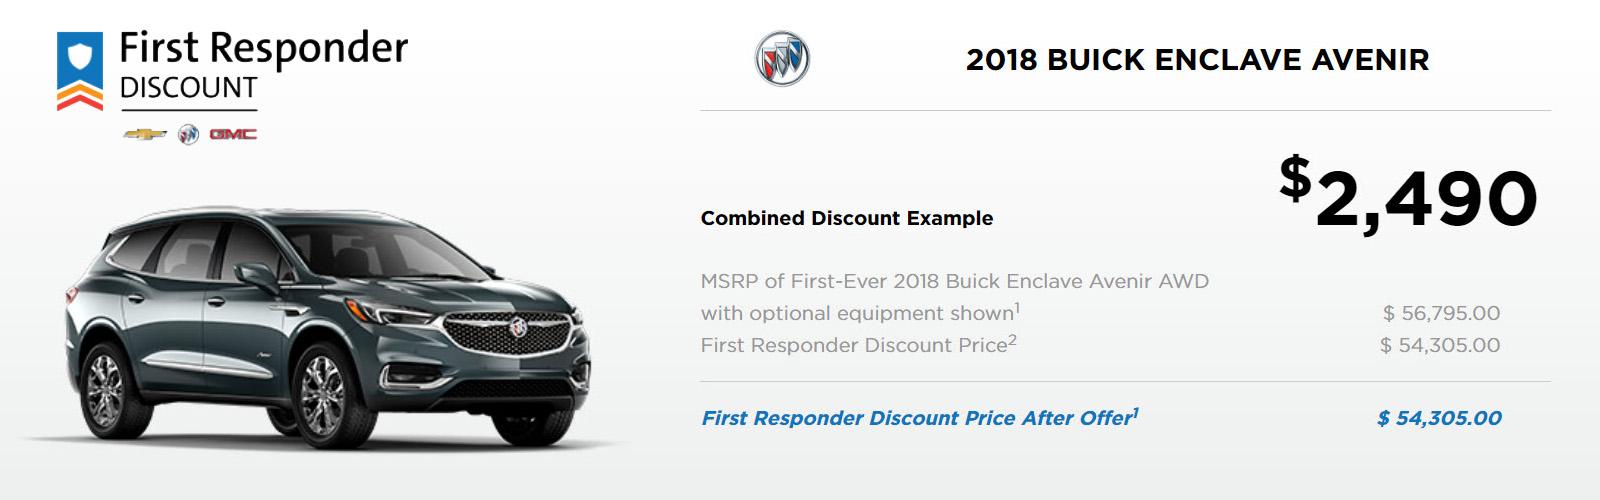 First Responder Buick Enclave Example Discount 